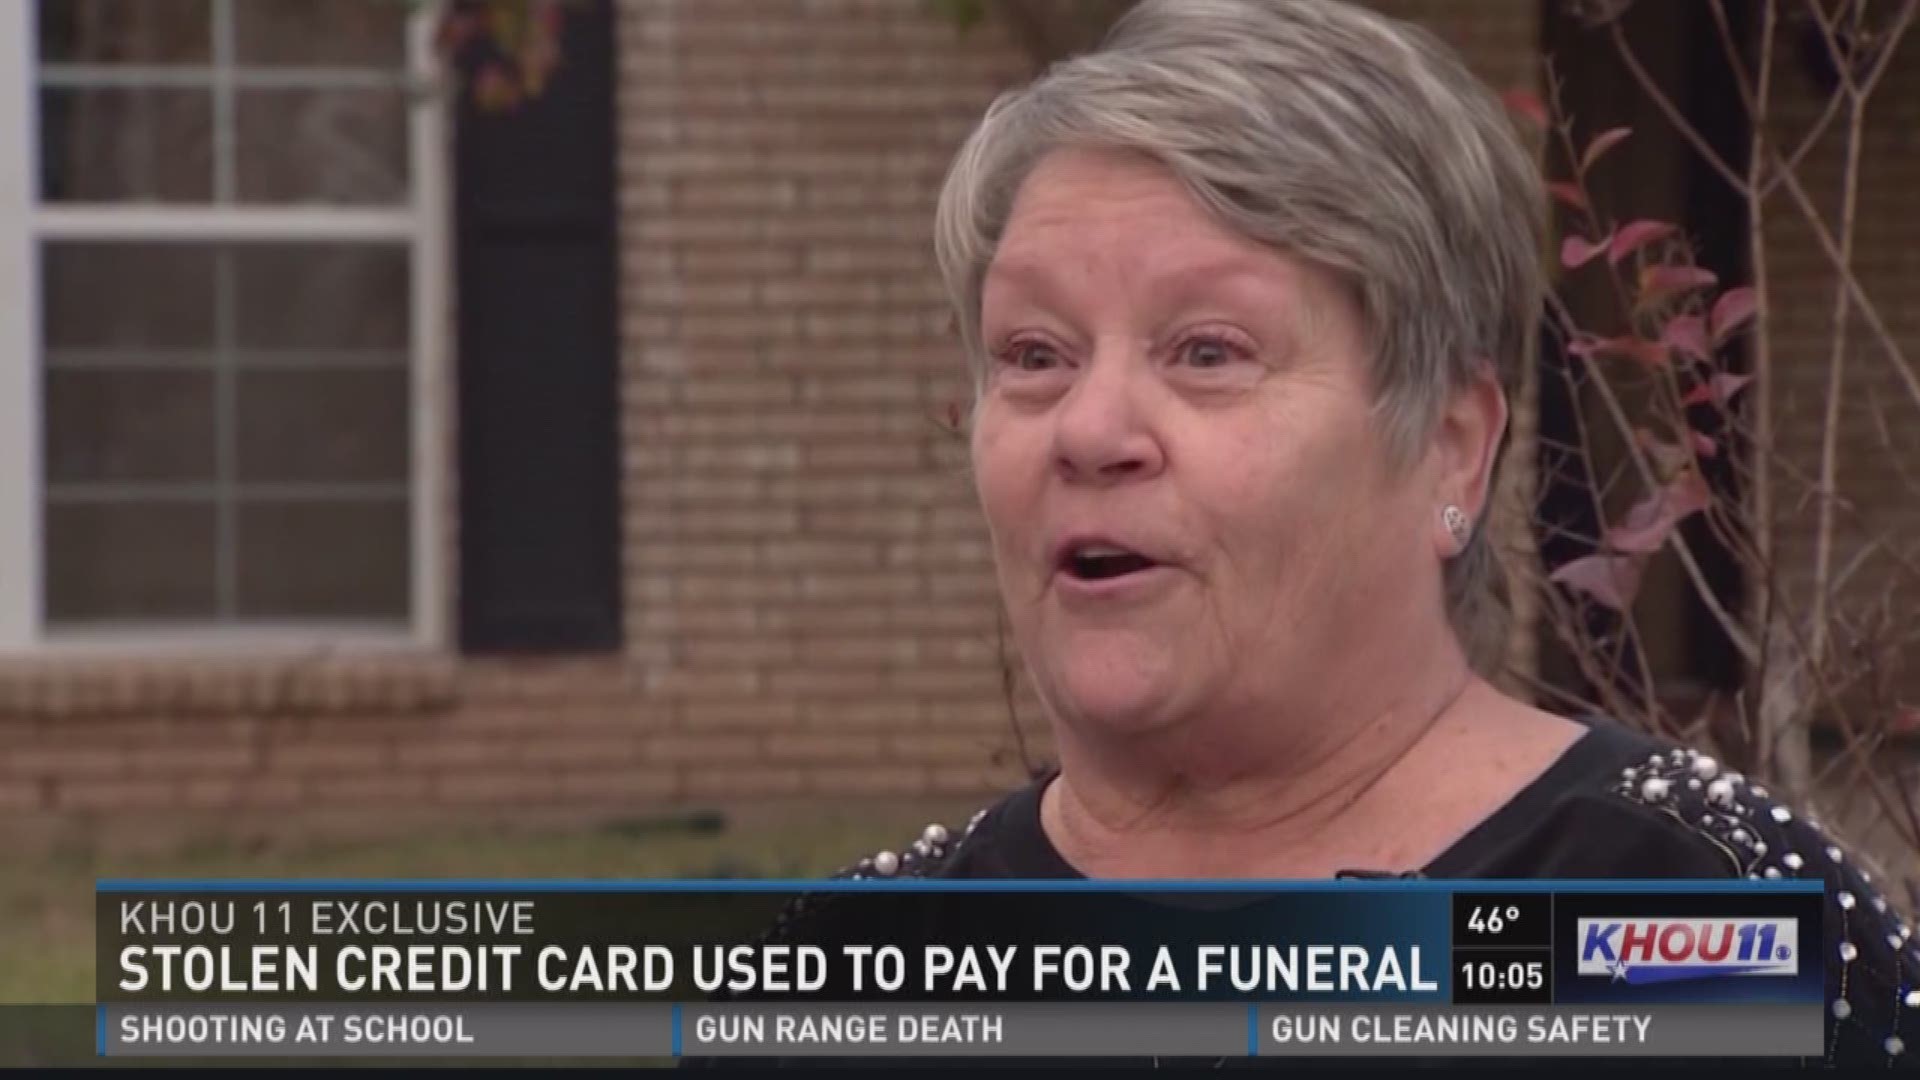 A Texas couple says they got off a Carnival Cruise ship in Galveston and realized their credit card was stolen. To their surprise, it was used to pay for a funeral service in Houston.